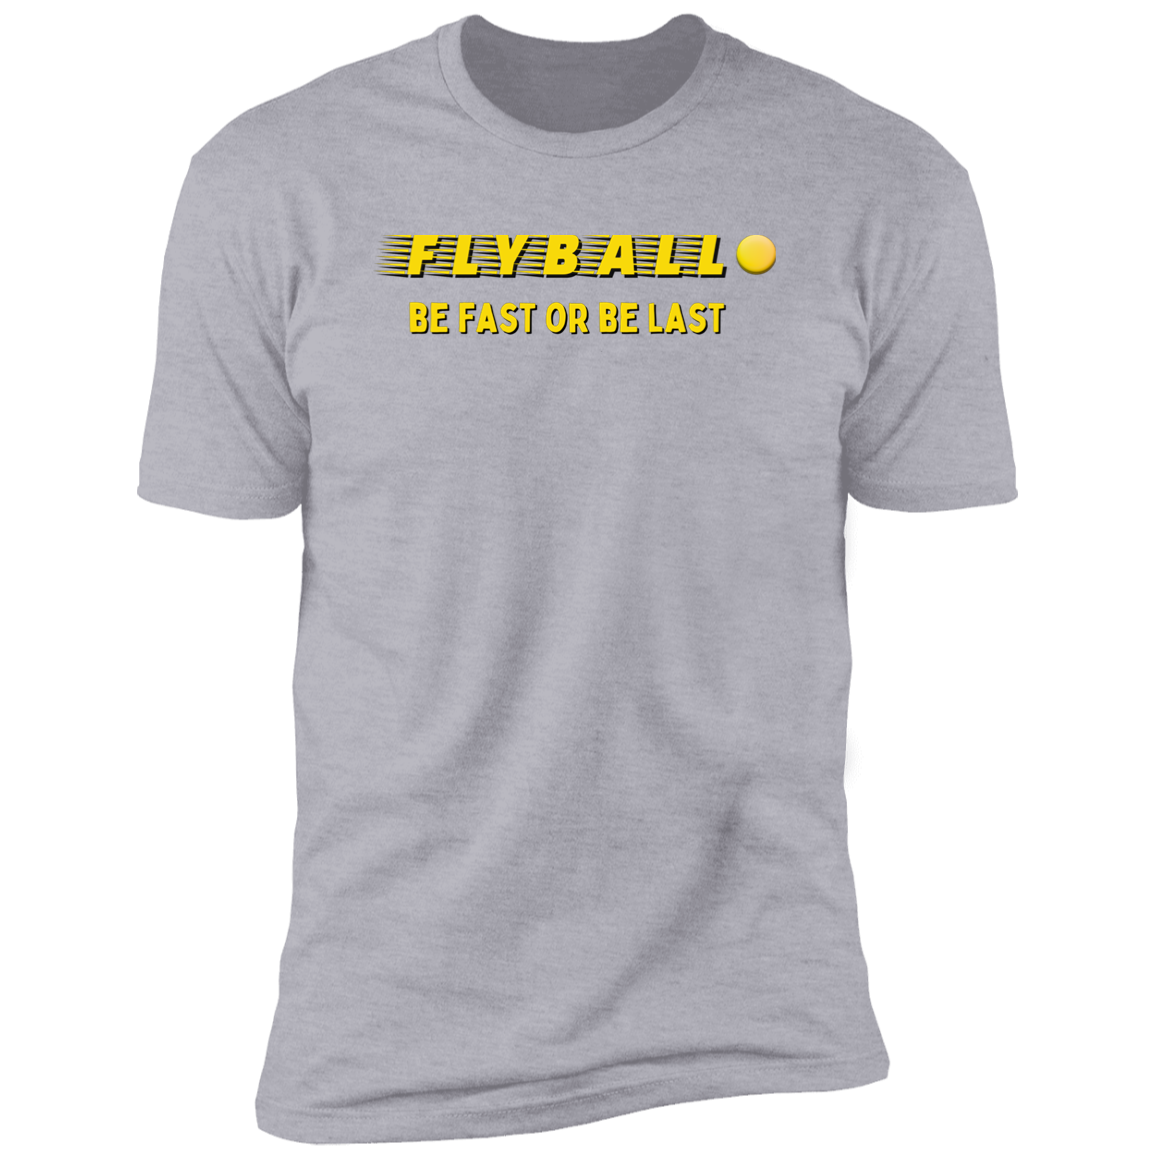 Flyball Be Fast or Be Last Dog Sport T-shirt, Flyball Shirt for humans, in light heather gray